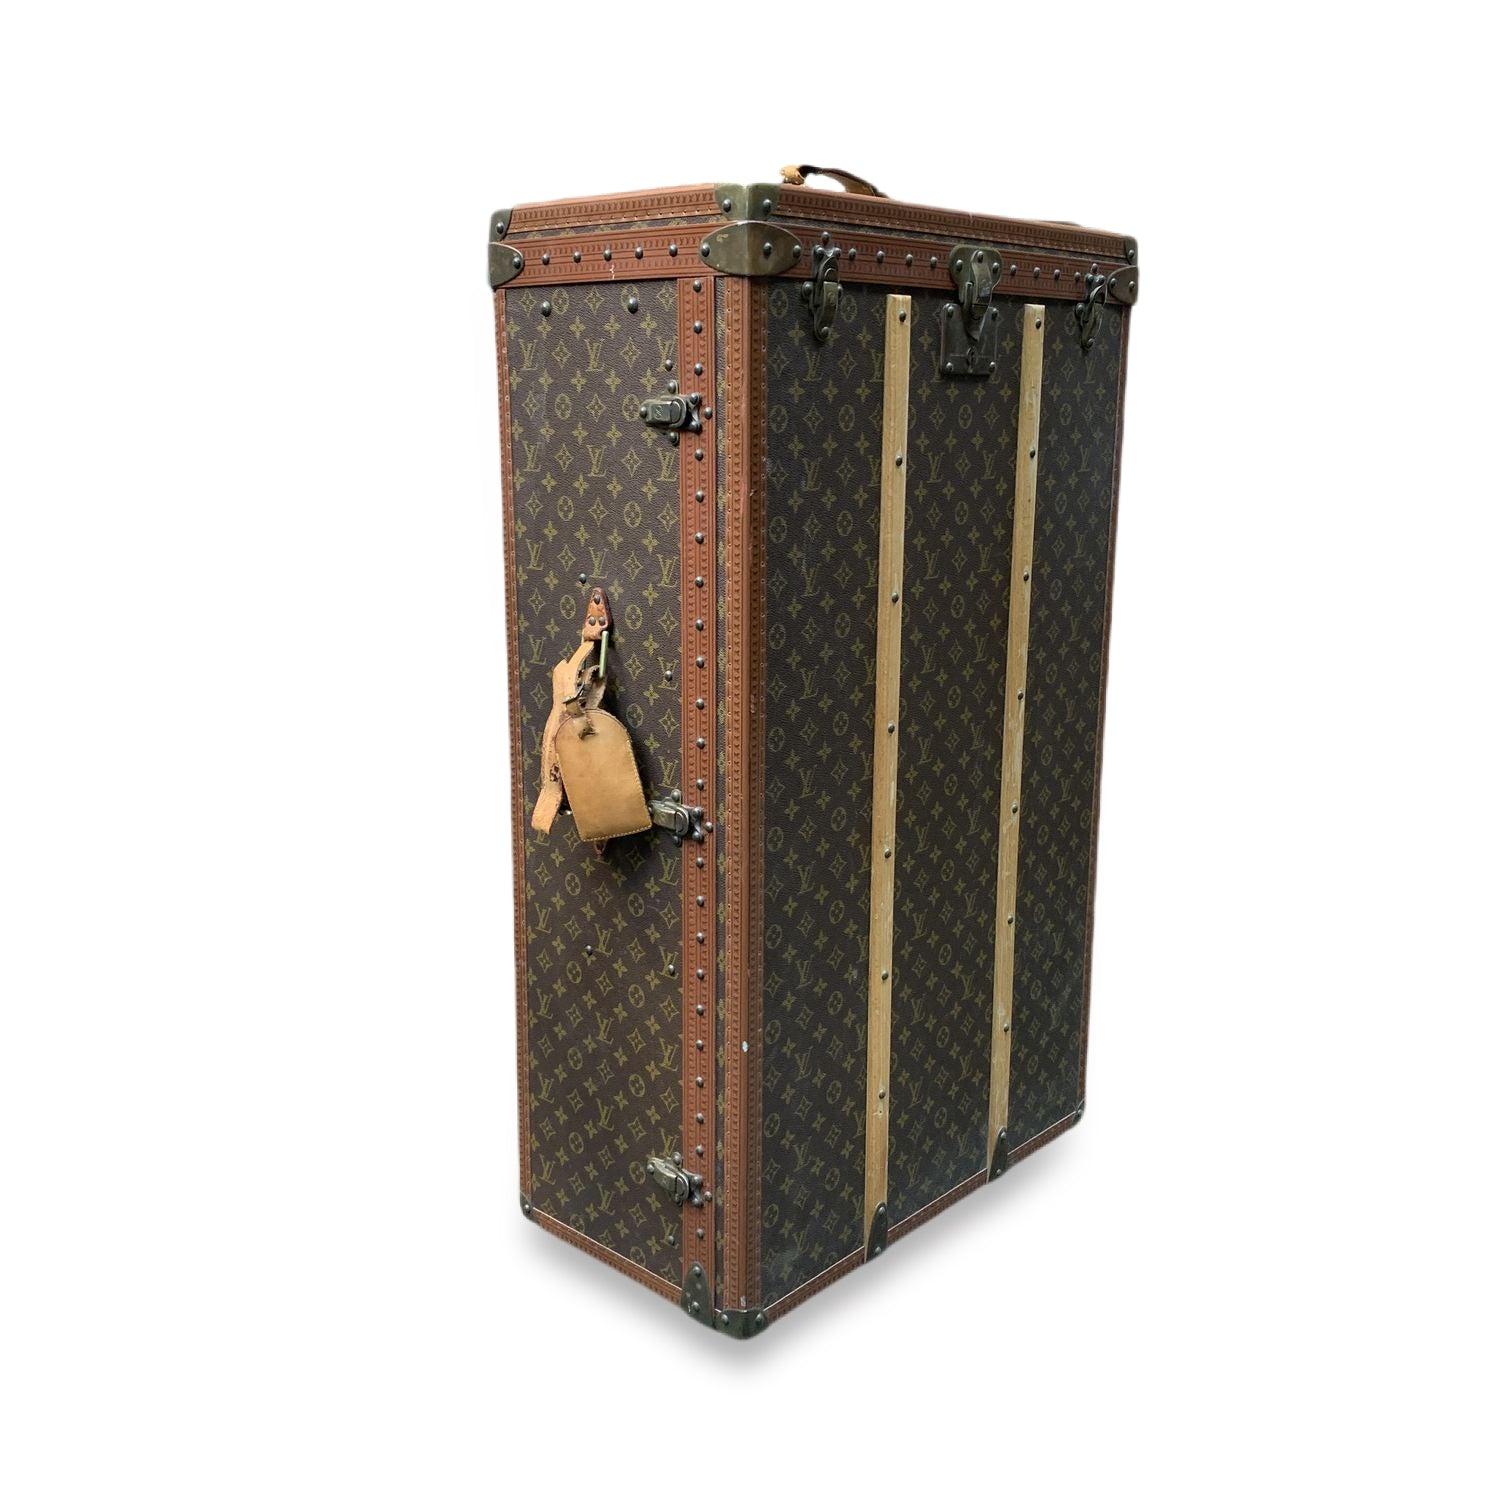 Rare vintage travel wardrobe trunk by Louis Vuitton, form the 1970s. It is crafted in the timeless monogram canvas with LV leather trim on the borders. Double handles. Leather ID tag still attached. Louis Vuitton main lock reinforced with two